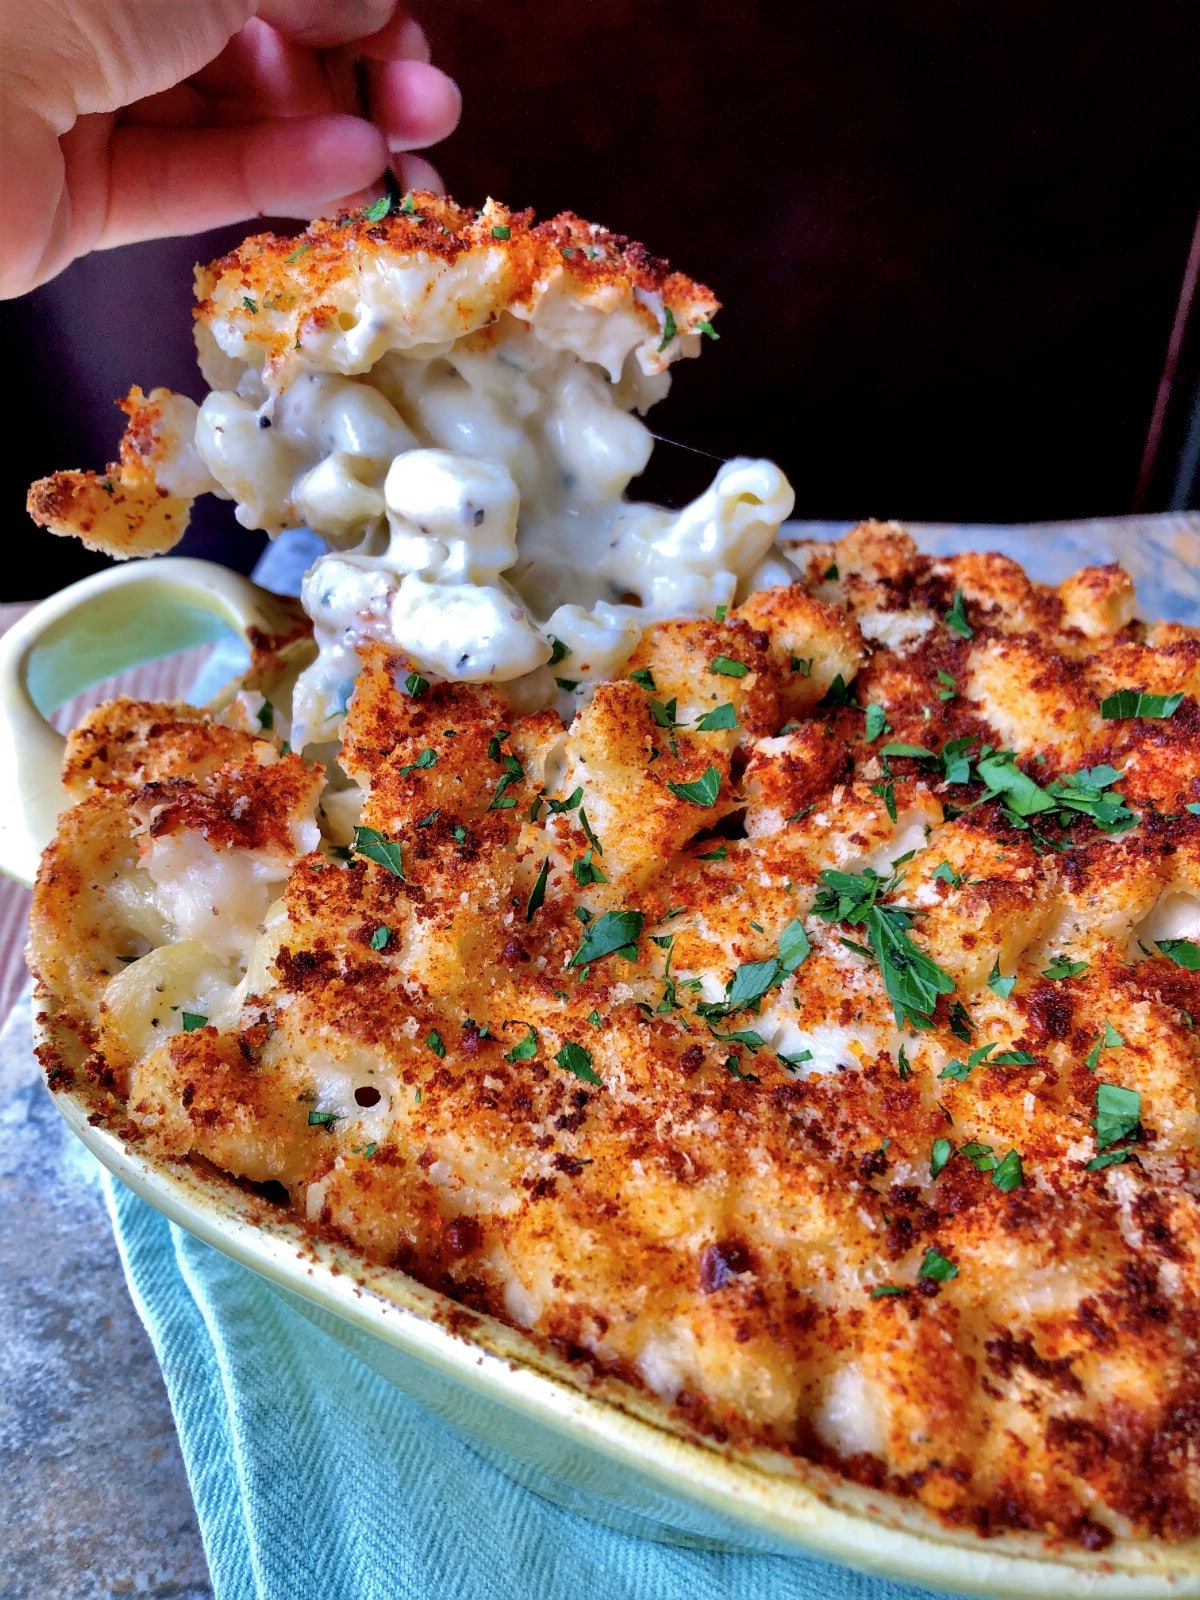 Baking dish filled with lobster mac and cheese